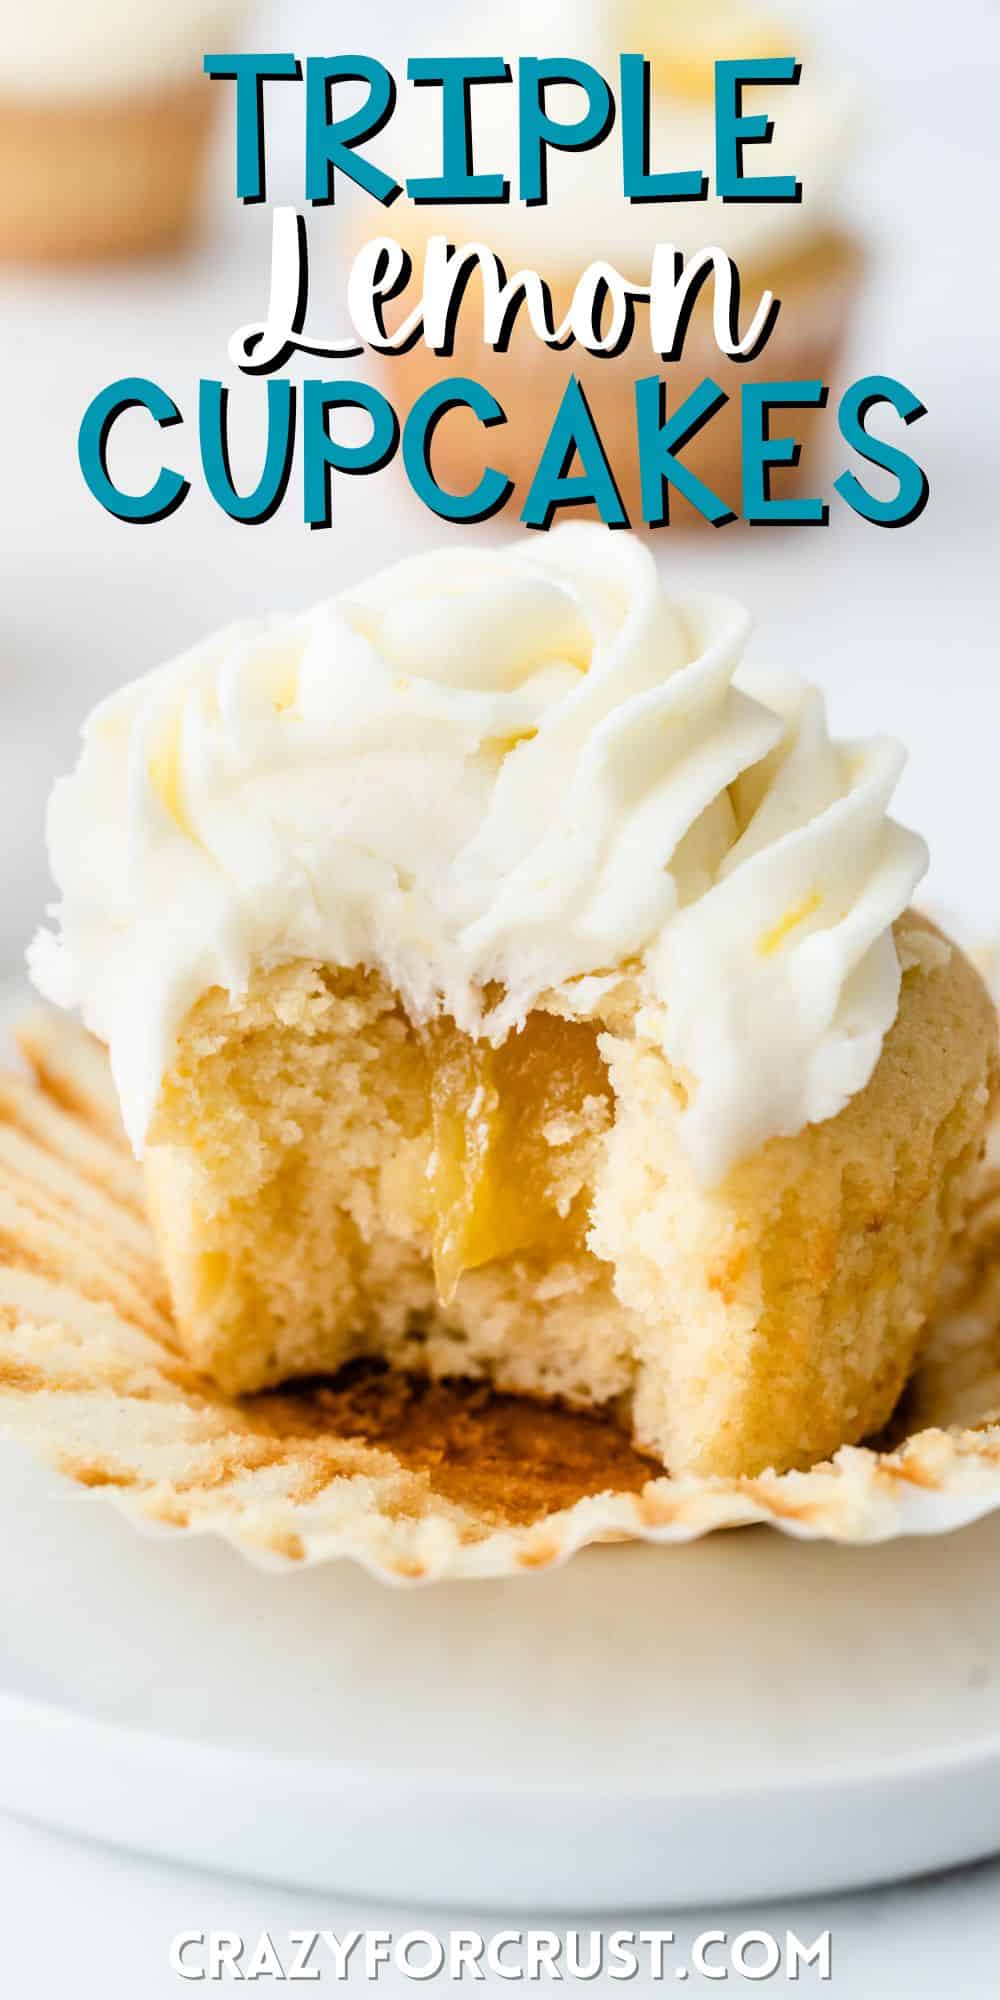 cupcakes with white frosting and a bite taken out of it with words on the image.